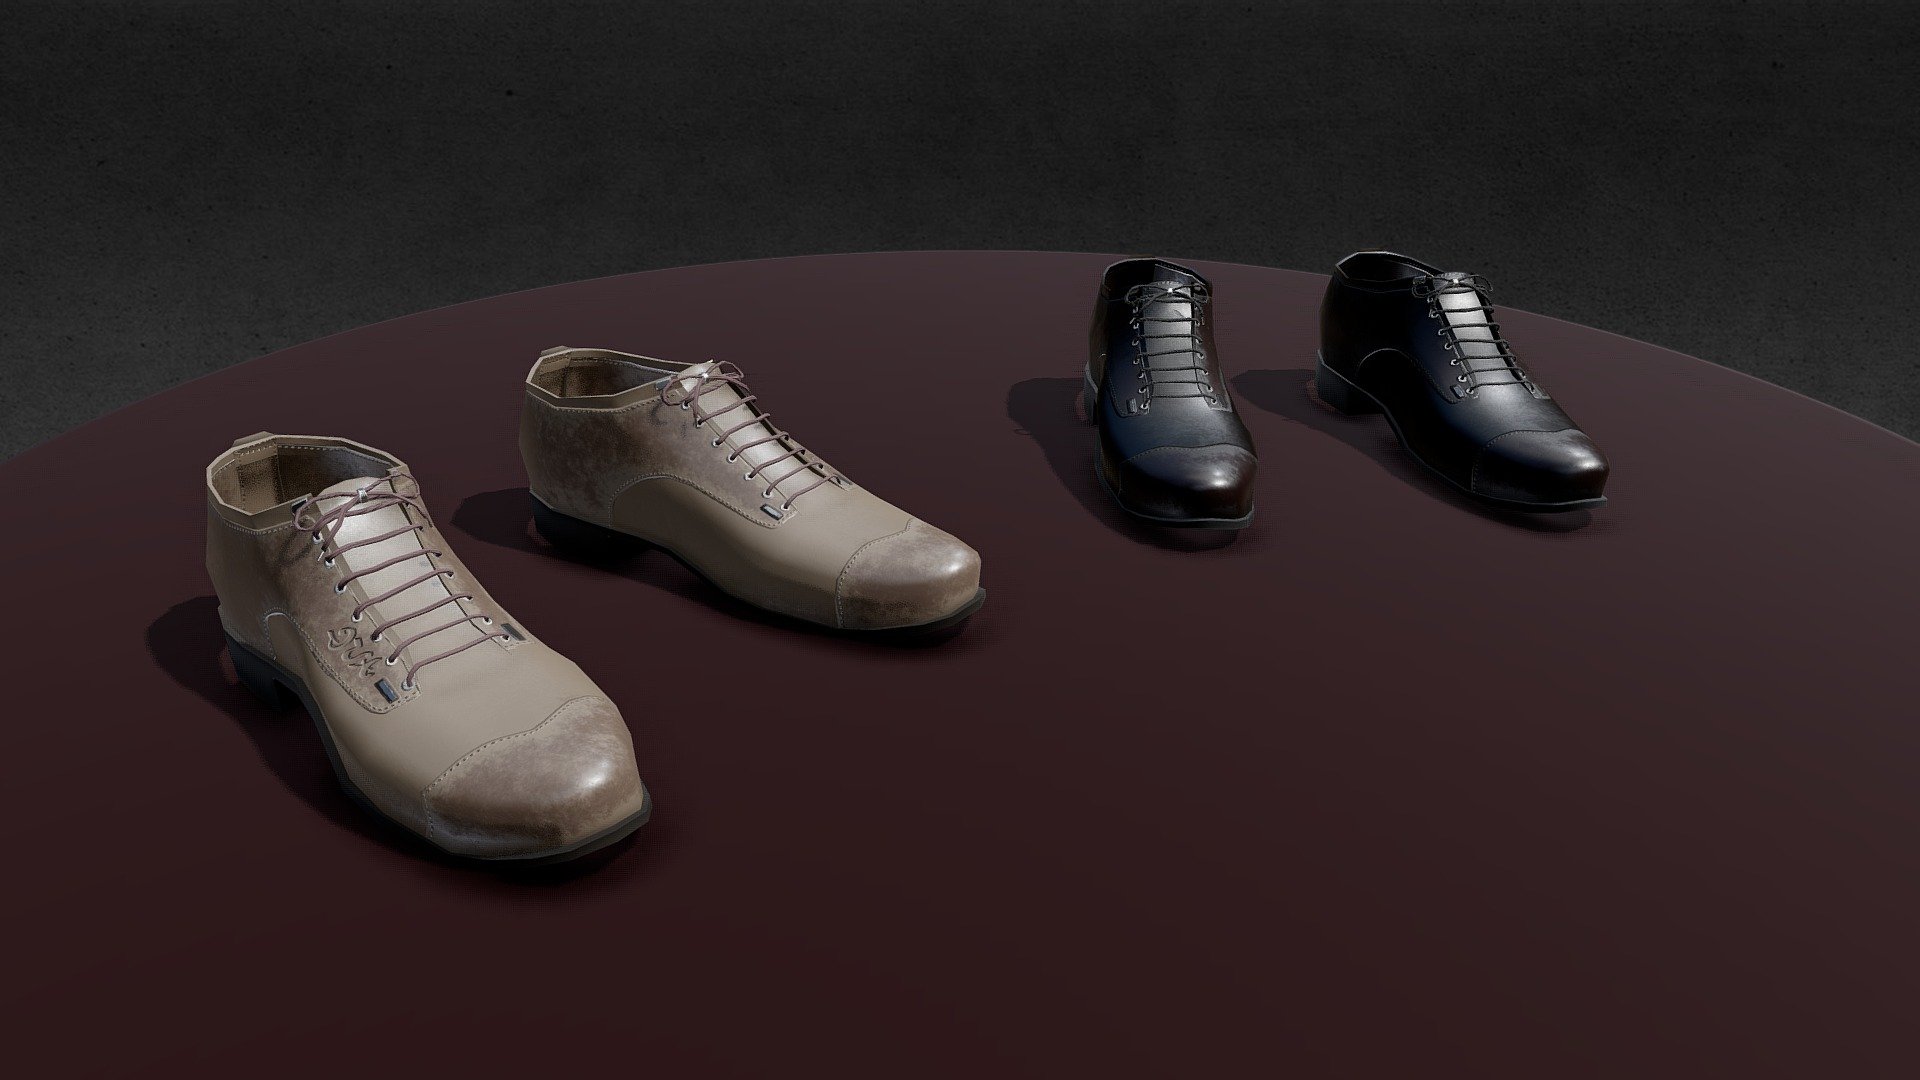 Classic shoes.
Game model, PBR material 3d model